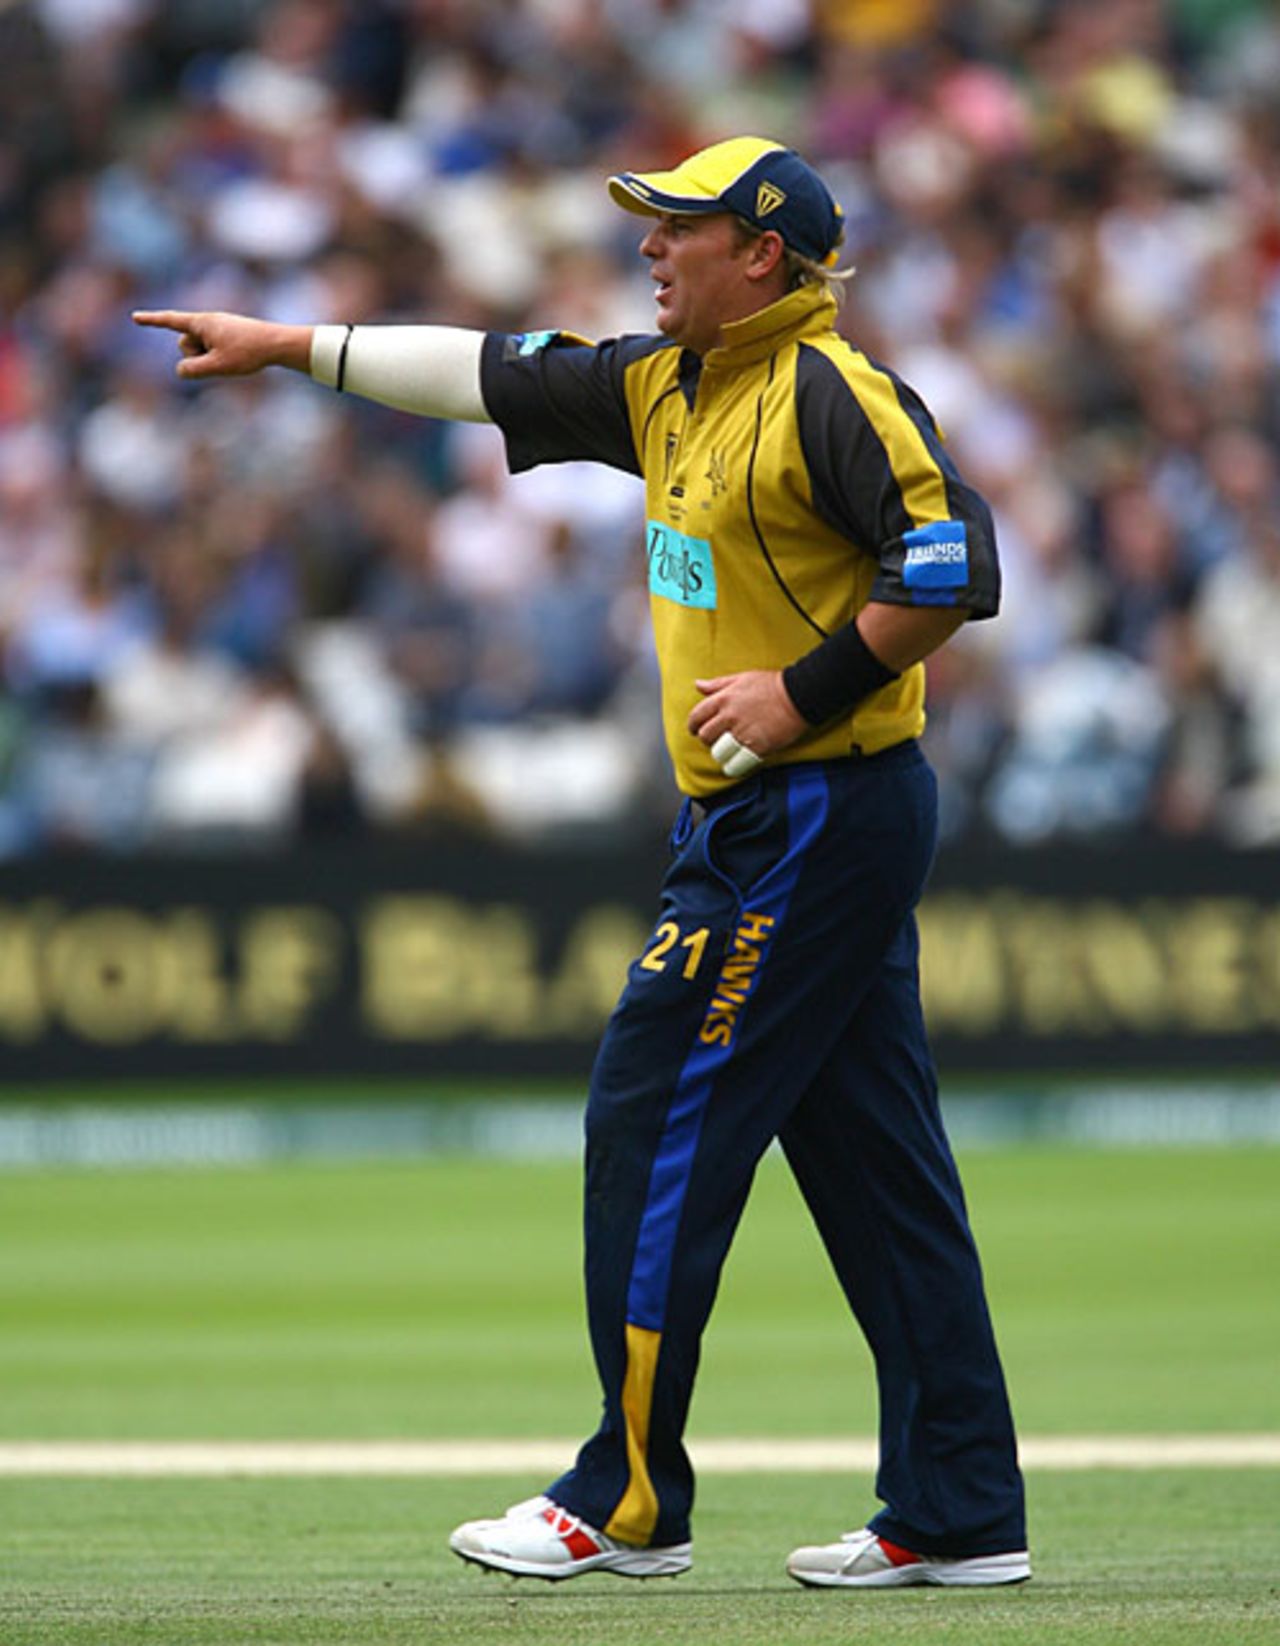 Shane Warne marshalls his troops, Durham v Hampshire, Friends Provident Trophy final, Lord's, August 18, 2007